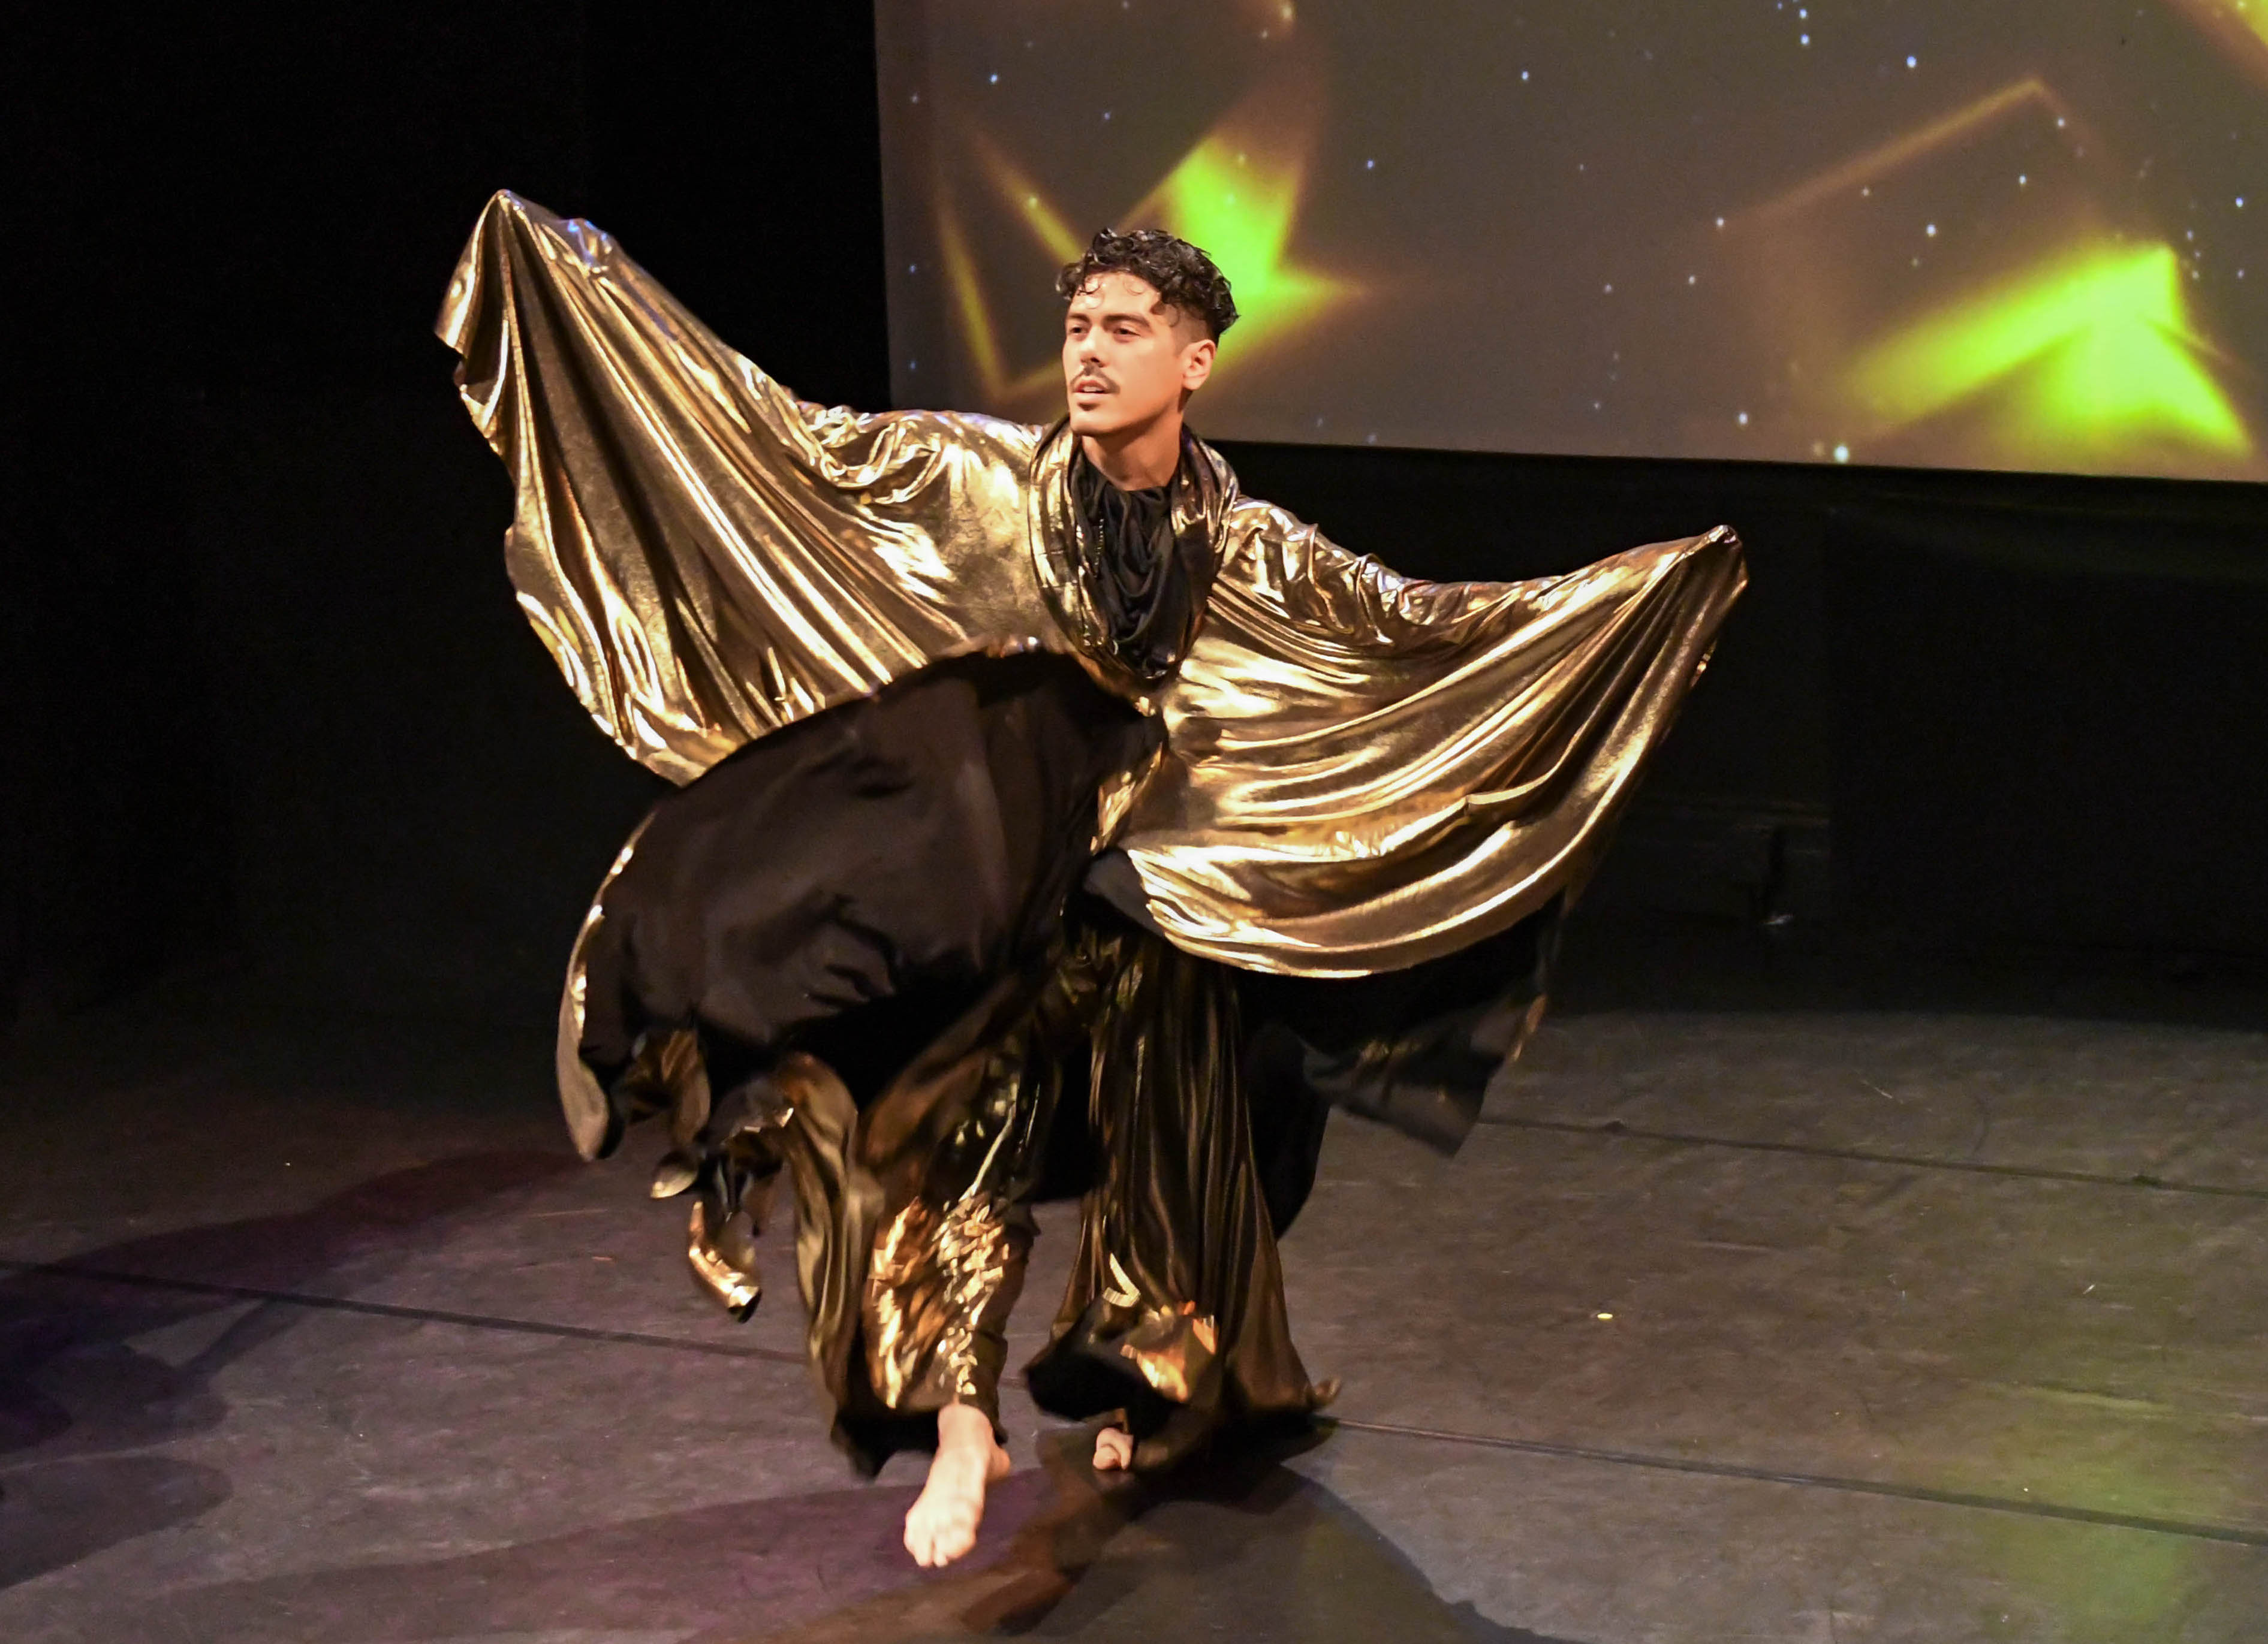 A dancer wearing a voluminous golden costume spreads their arms wide